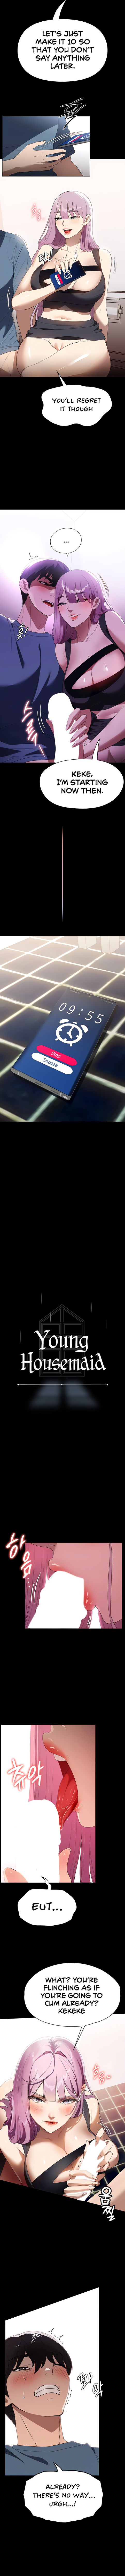 young-housemaid-chap-32-1